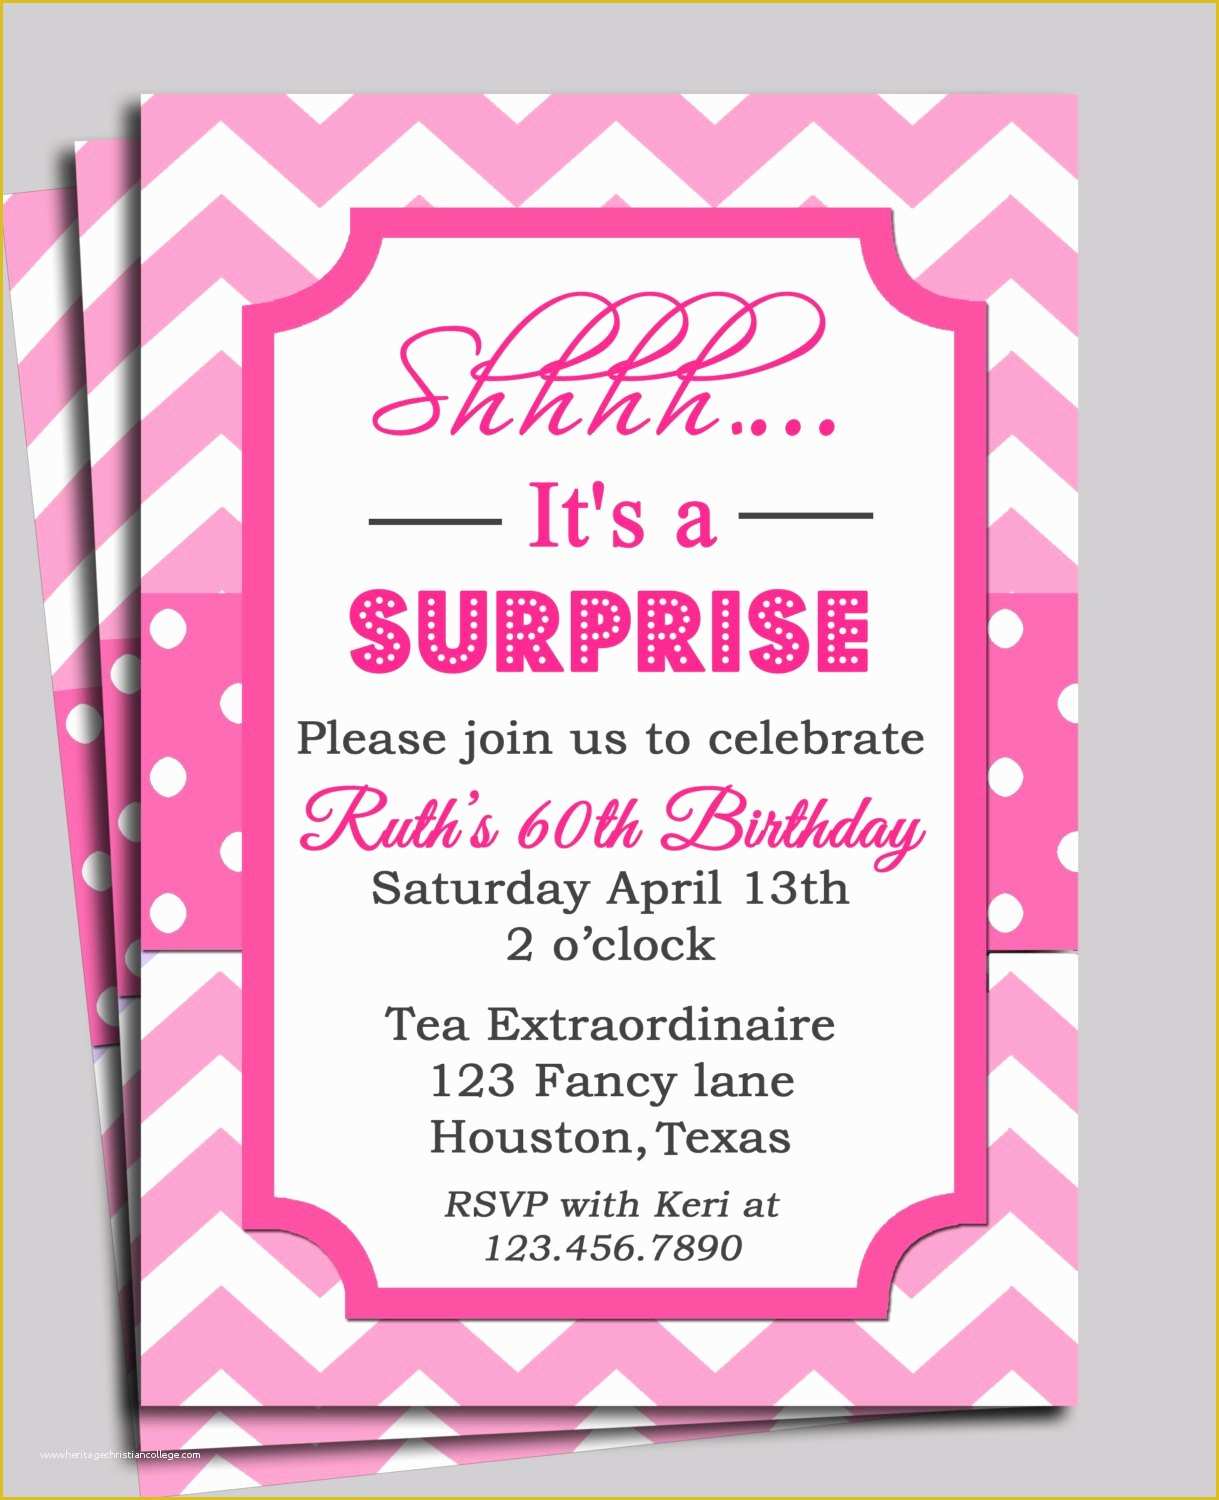 Free Printable Surprise Party Invitation Templates Of Chevron Invitation Printable or Free Shipping You Pick